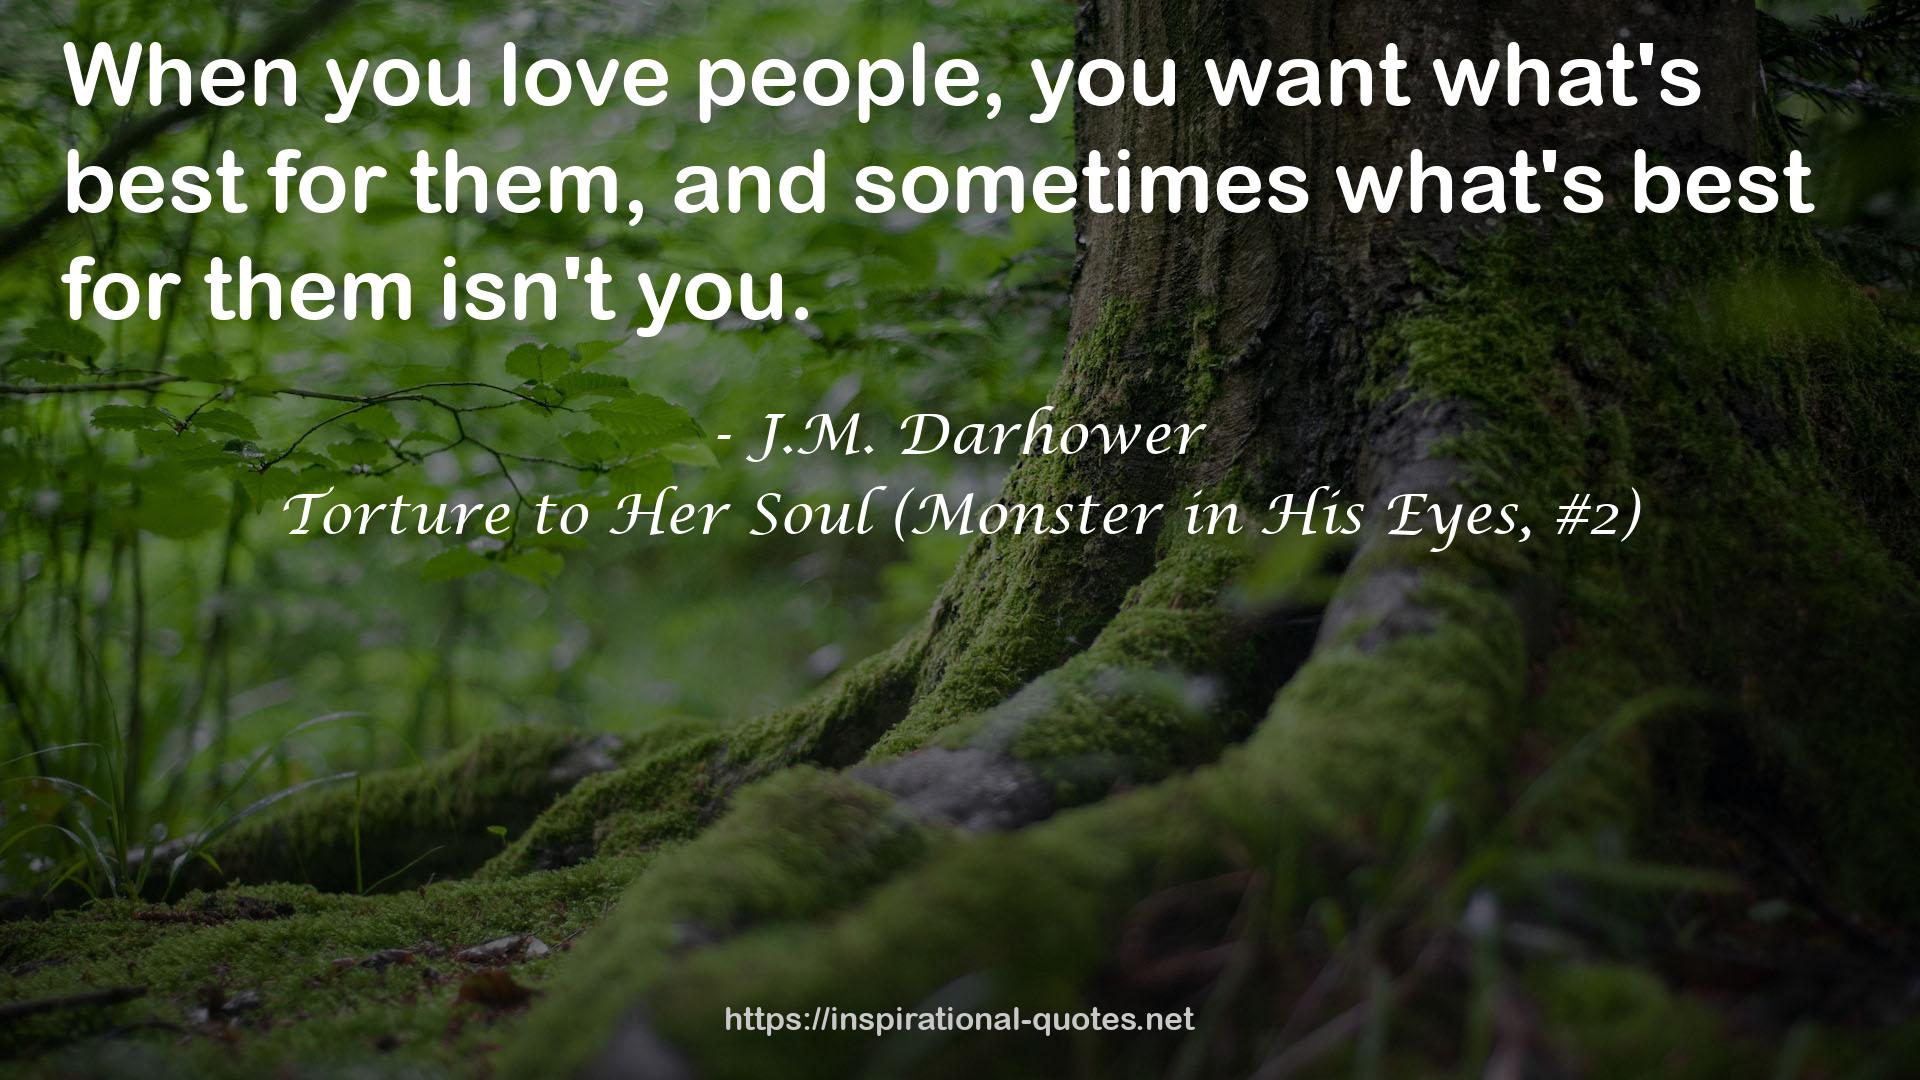 Torture to Her Soul (Monster in His Eyes, #2) QUOTES